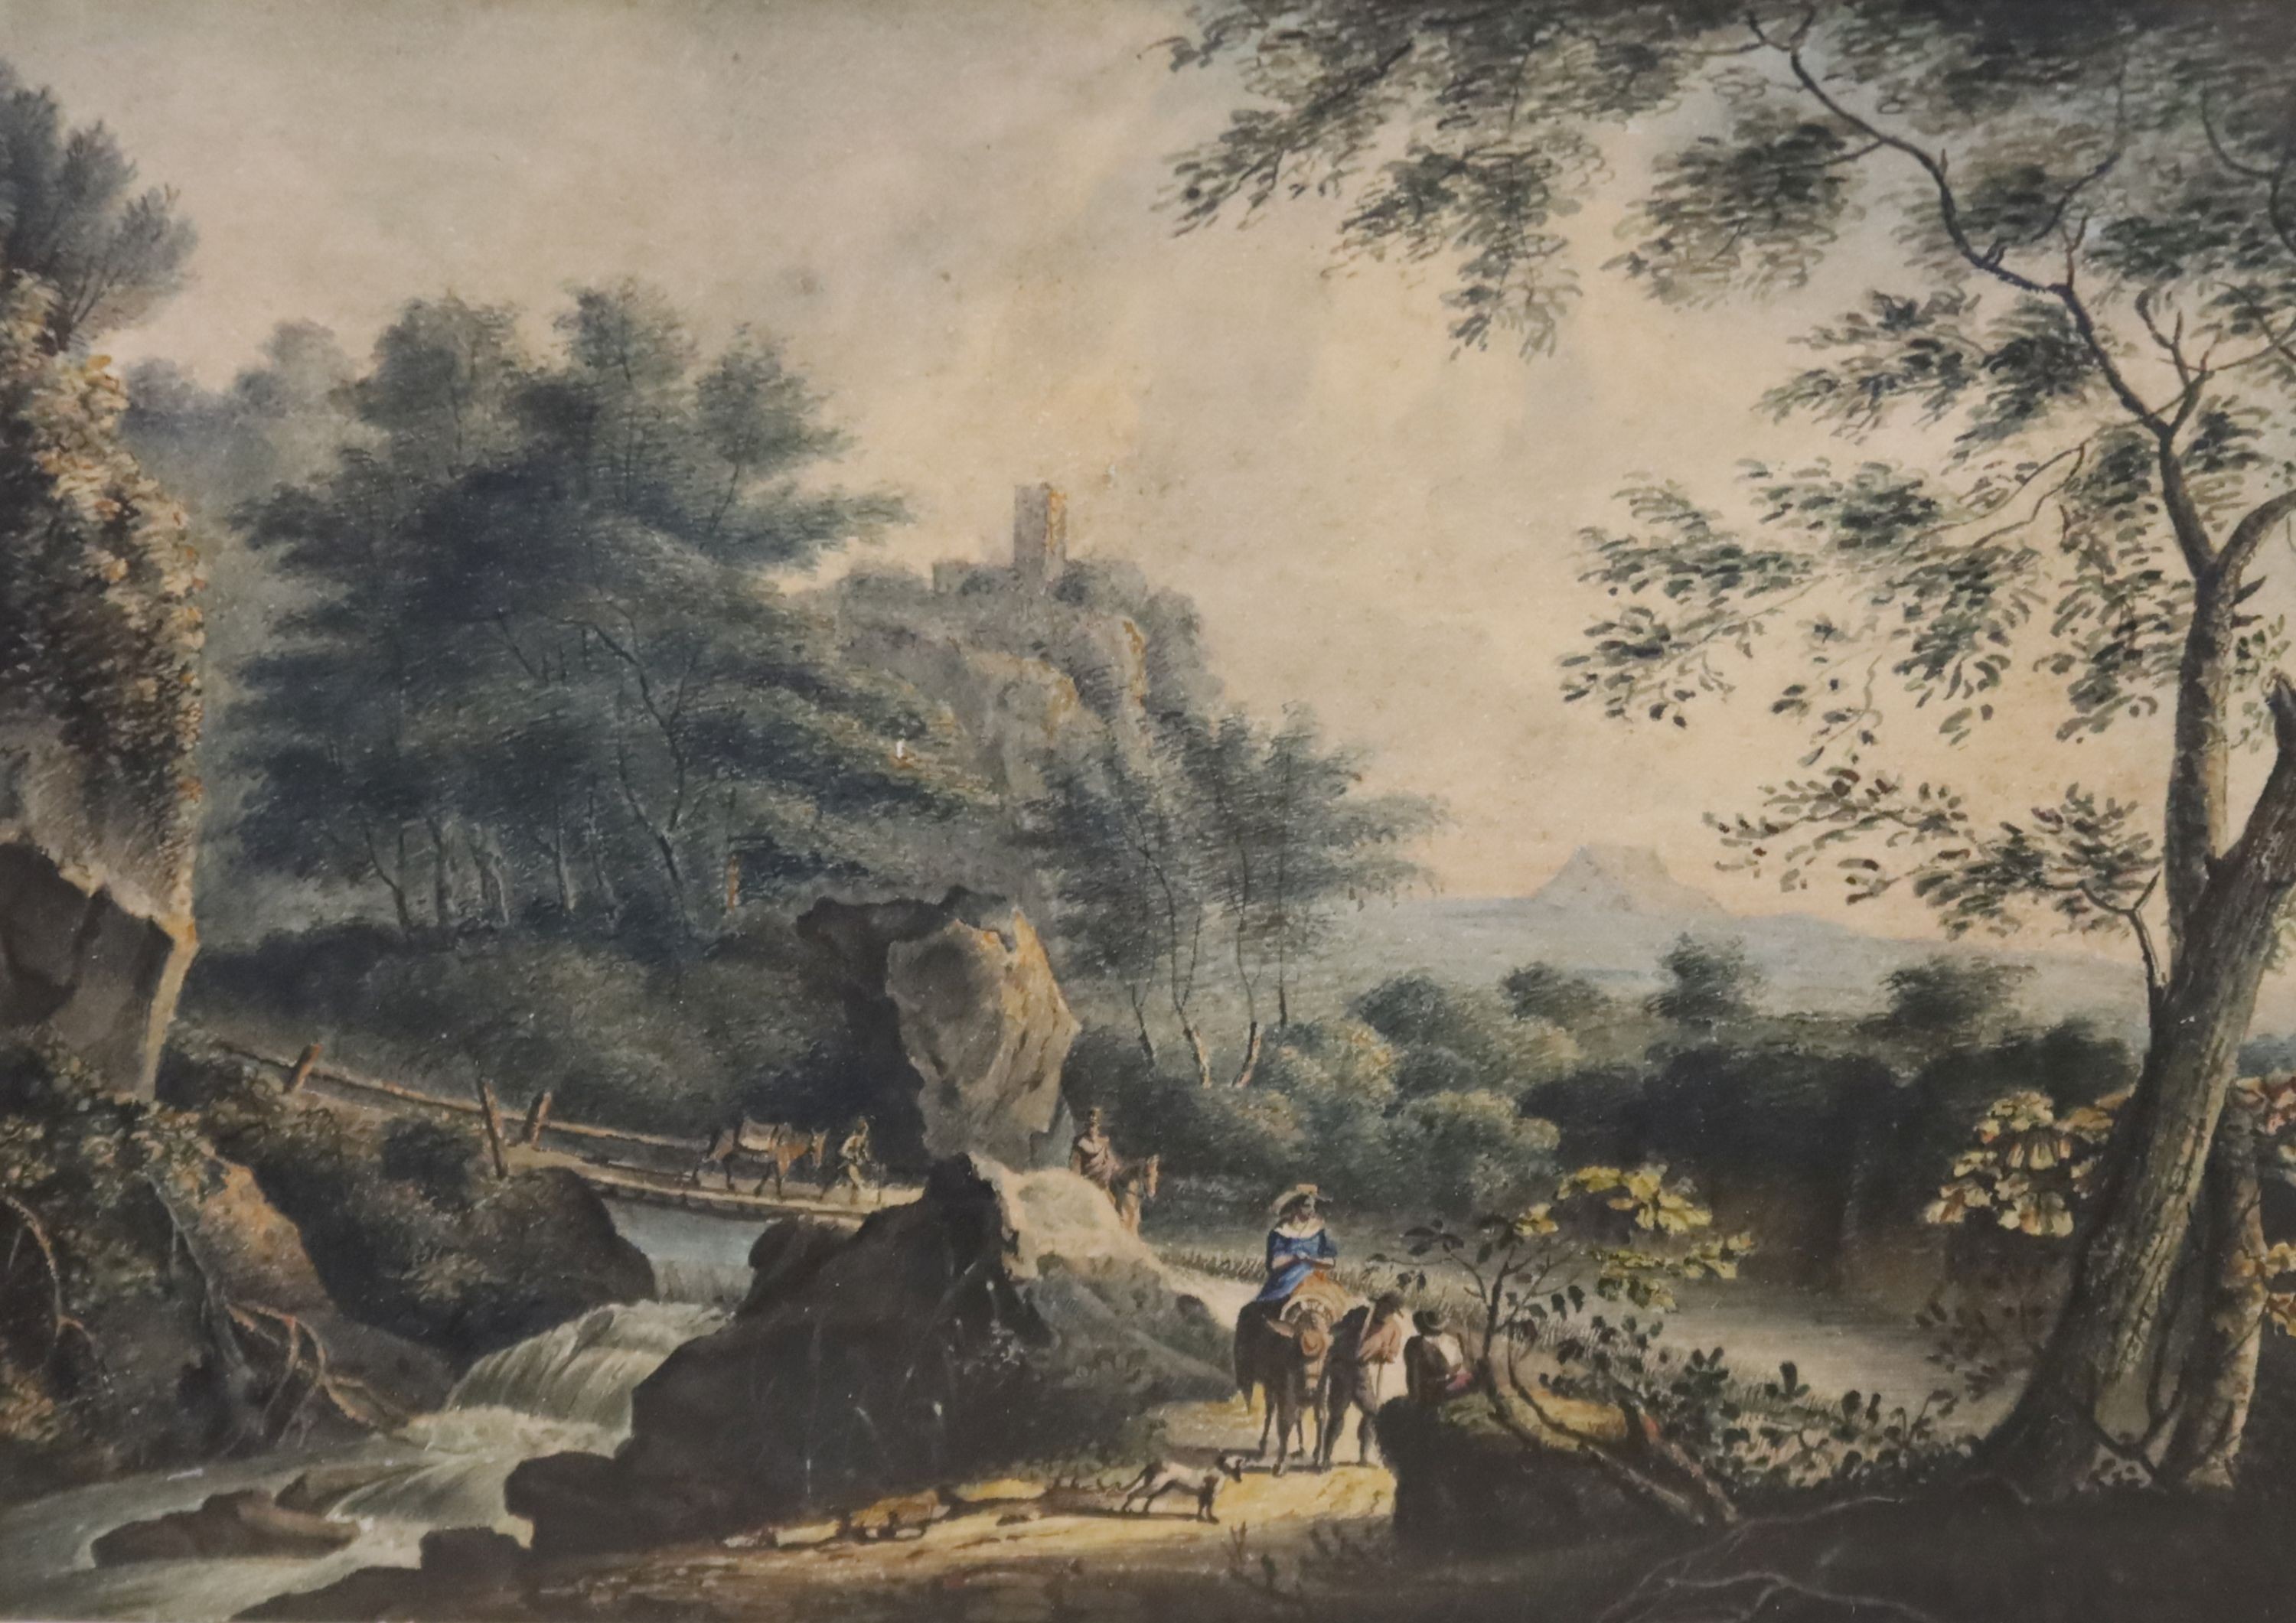 Manner of William Payne, watercolour, Travellers in a landscape, 11 x 16cm